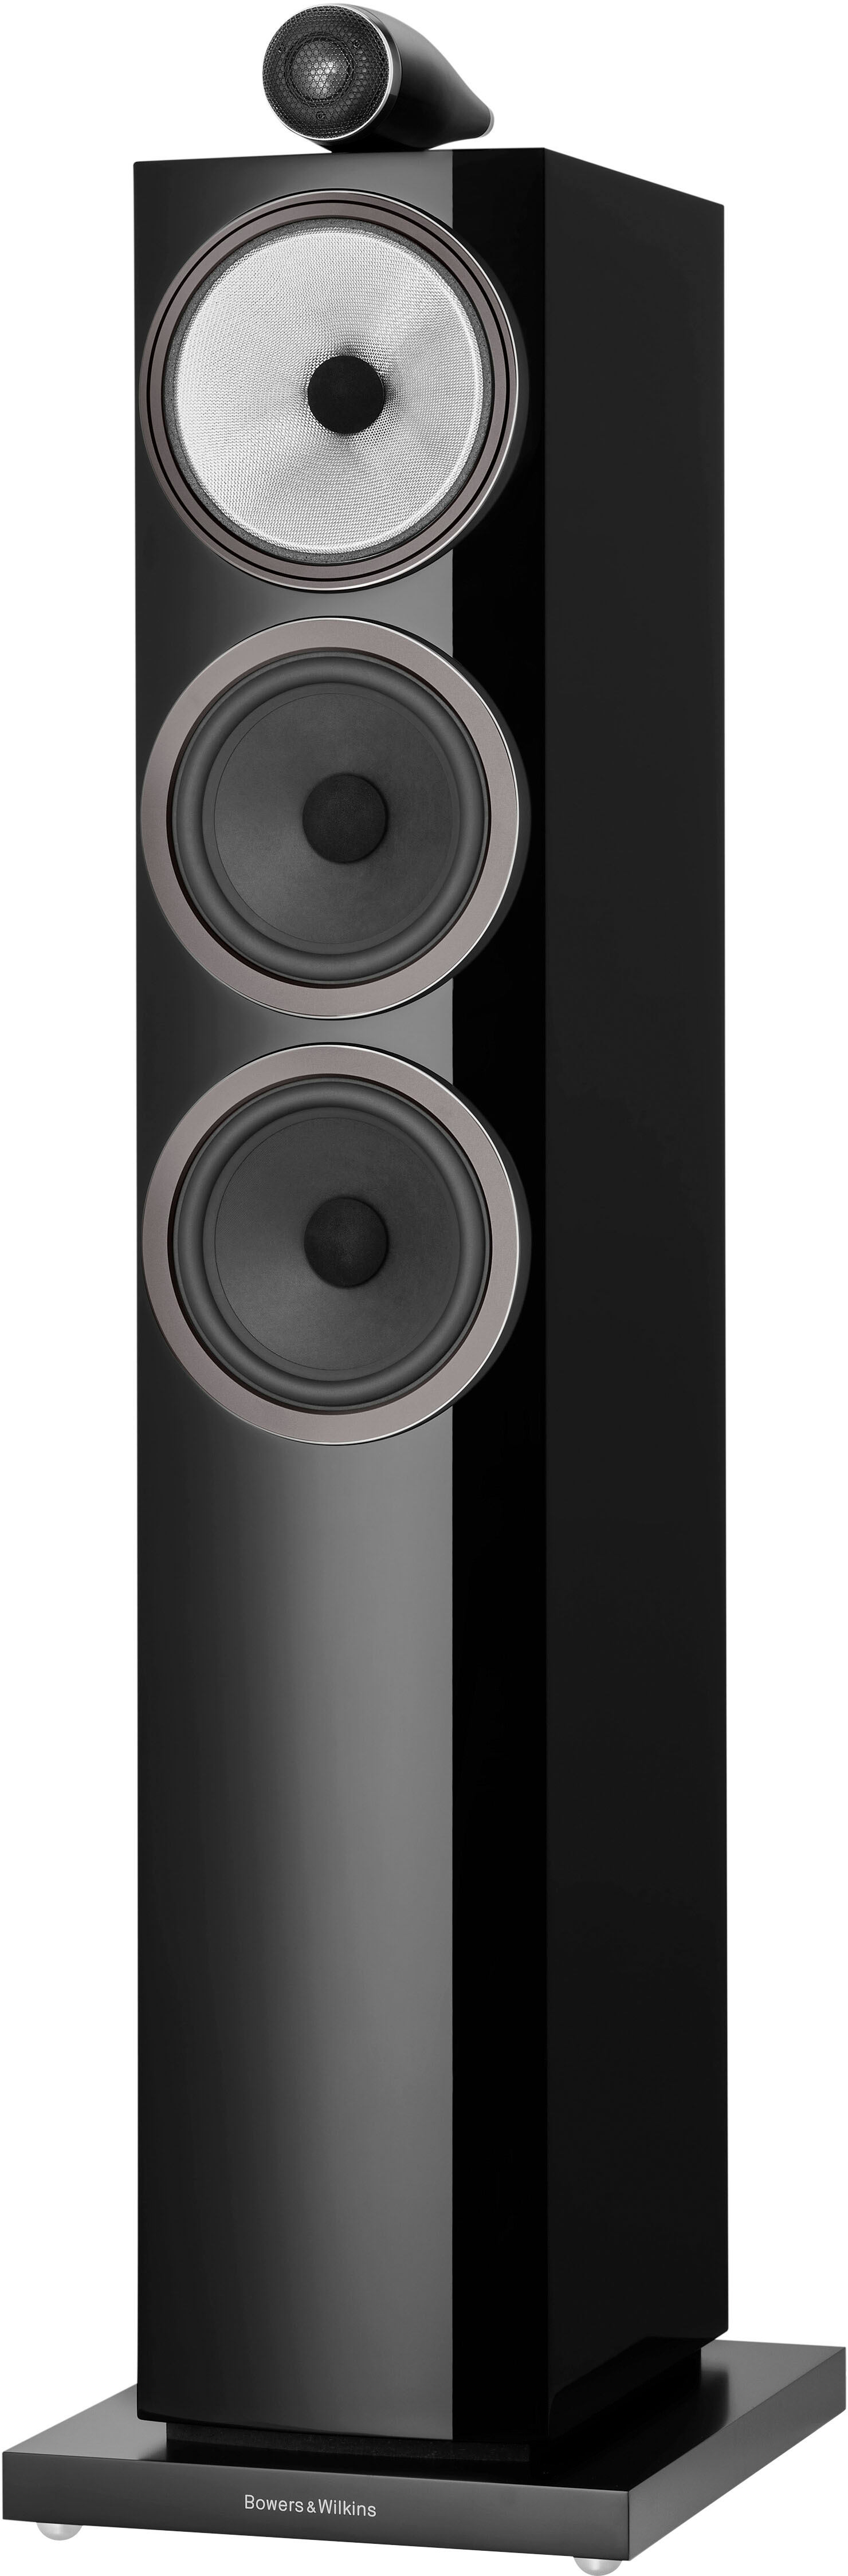 Bowers & Wilkins Zeppelin Speaker with Wireless Streaming via iOS and  Android Compatible Music App with Built-In Alexa Midnight Grey Zeppelin -  Best Buy